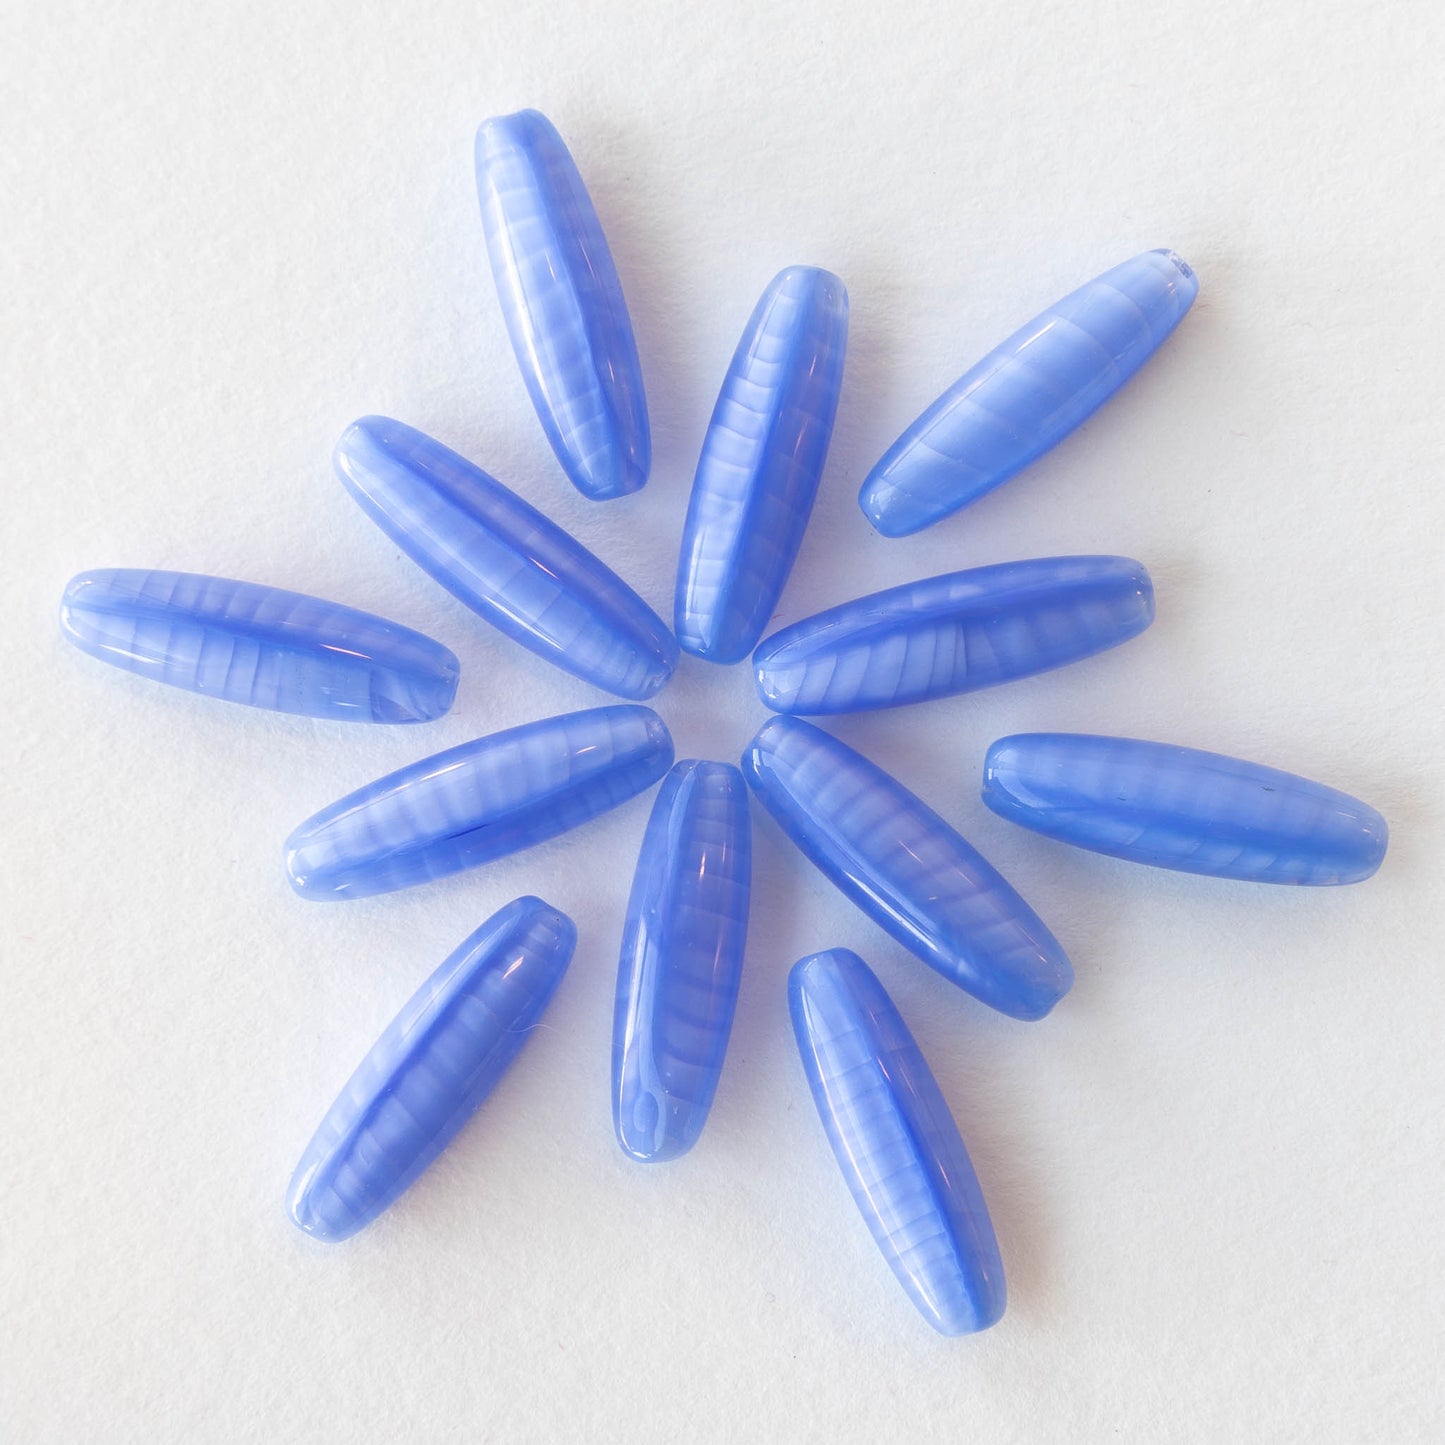 20mm Tapered Tube Beads - Silky Periwinkle Blue - 10